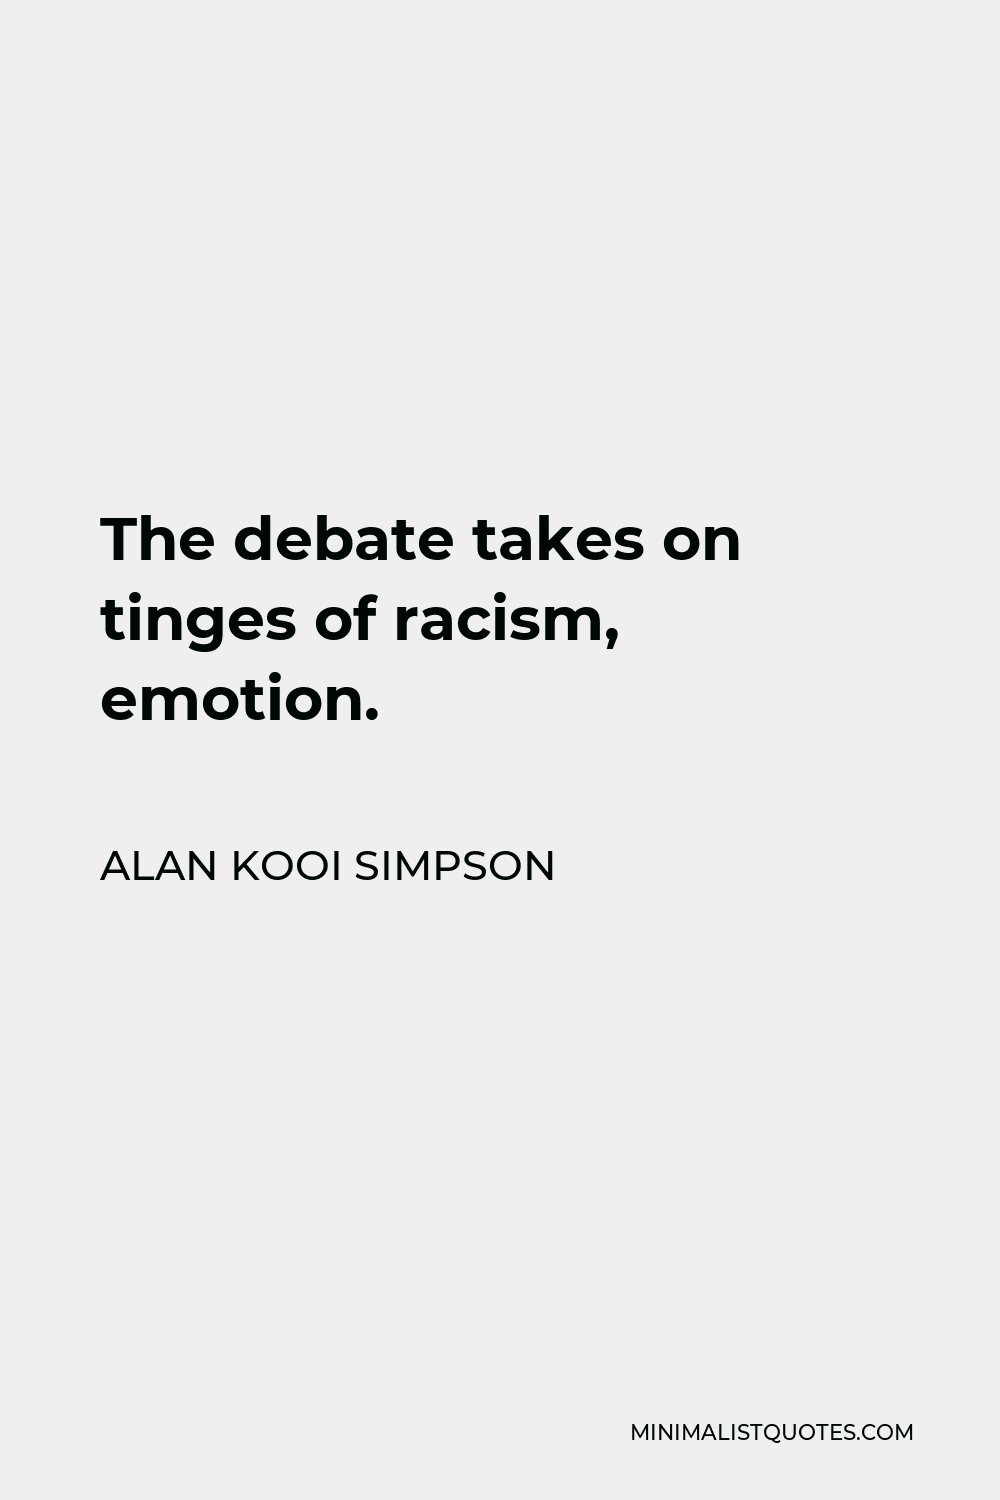 Alan Kooi Simpson Quote - The debate takes on tinges of racism, emotion.